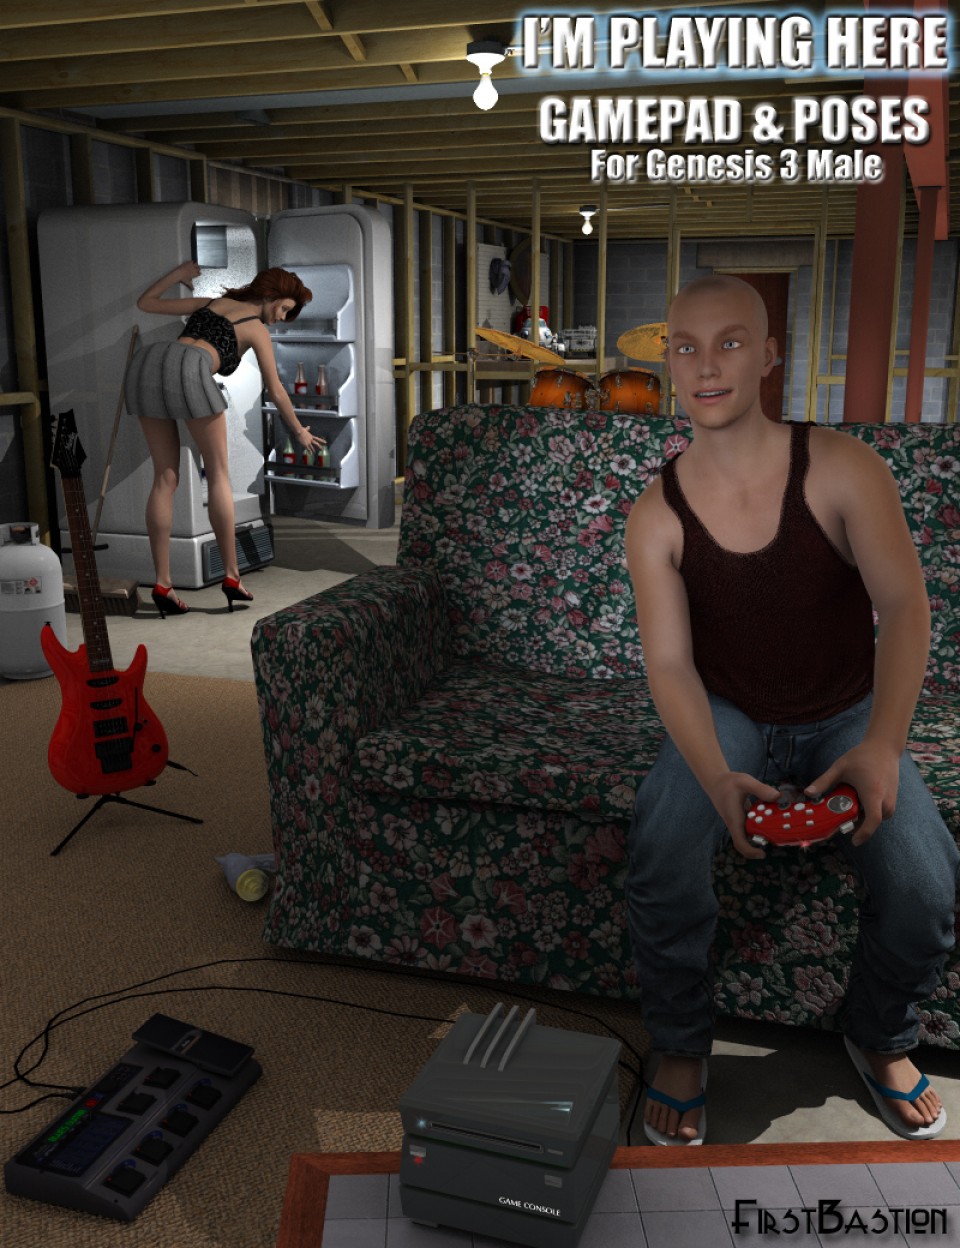 I'm Playing Here - Gamepad and Poses for Genesis 3 Male